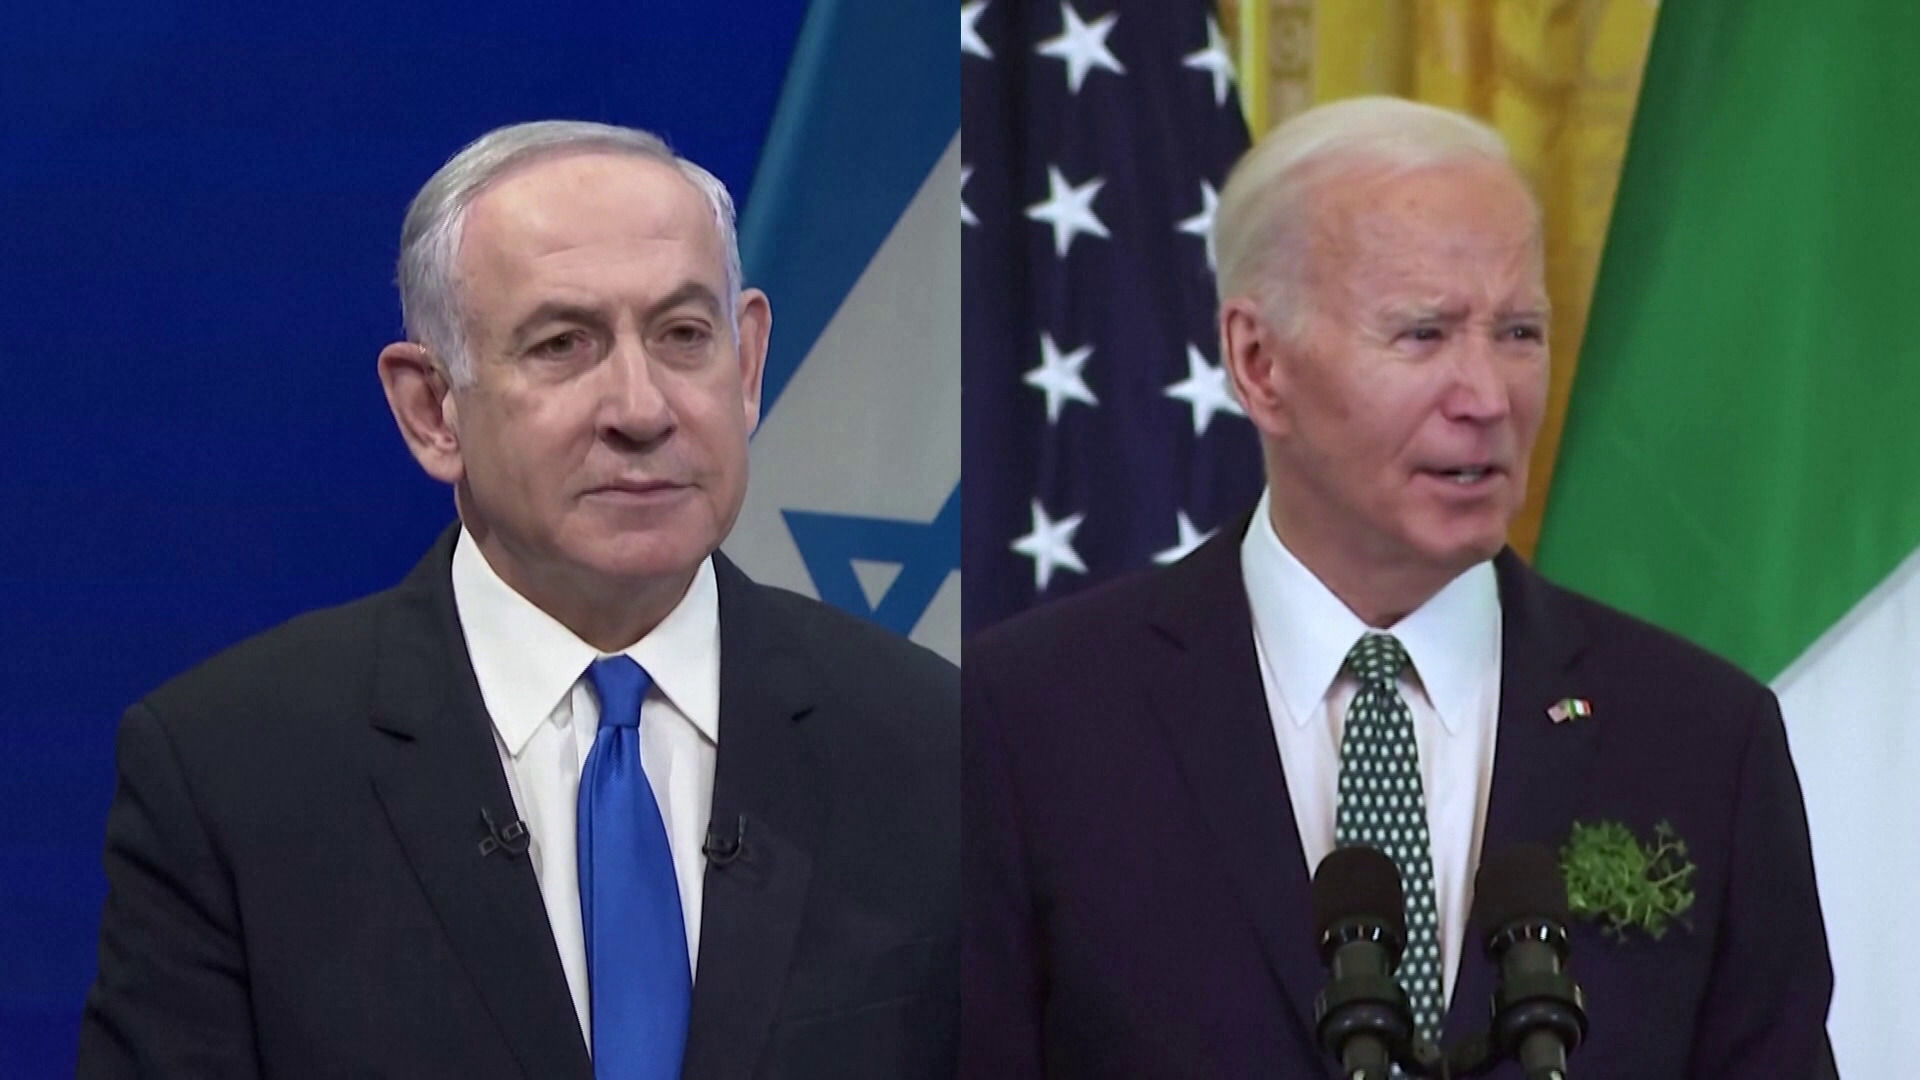 Biden threatens to change U.S. policy on Gaza war if Israel does not protect civilians